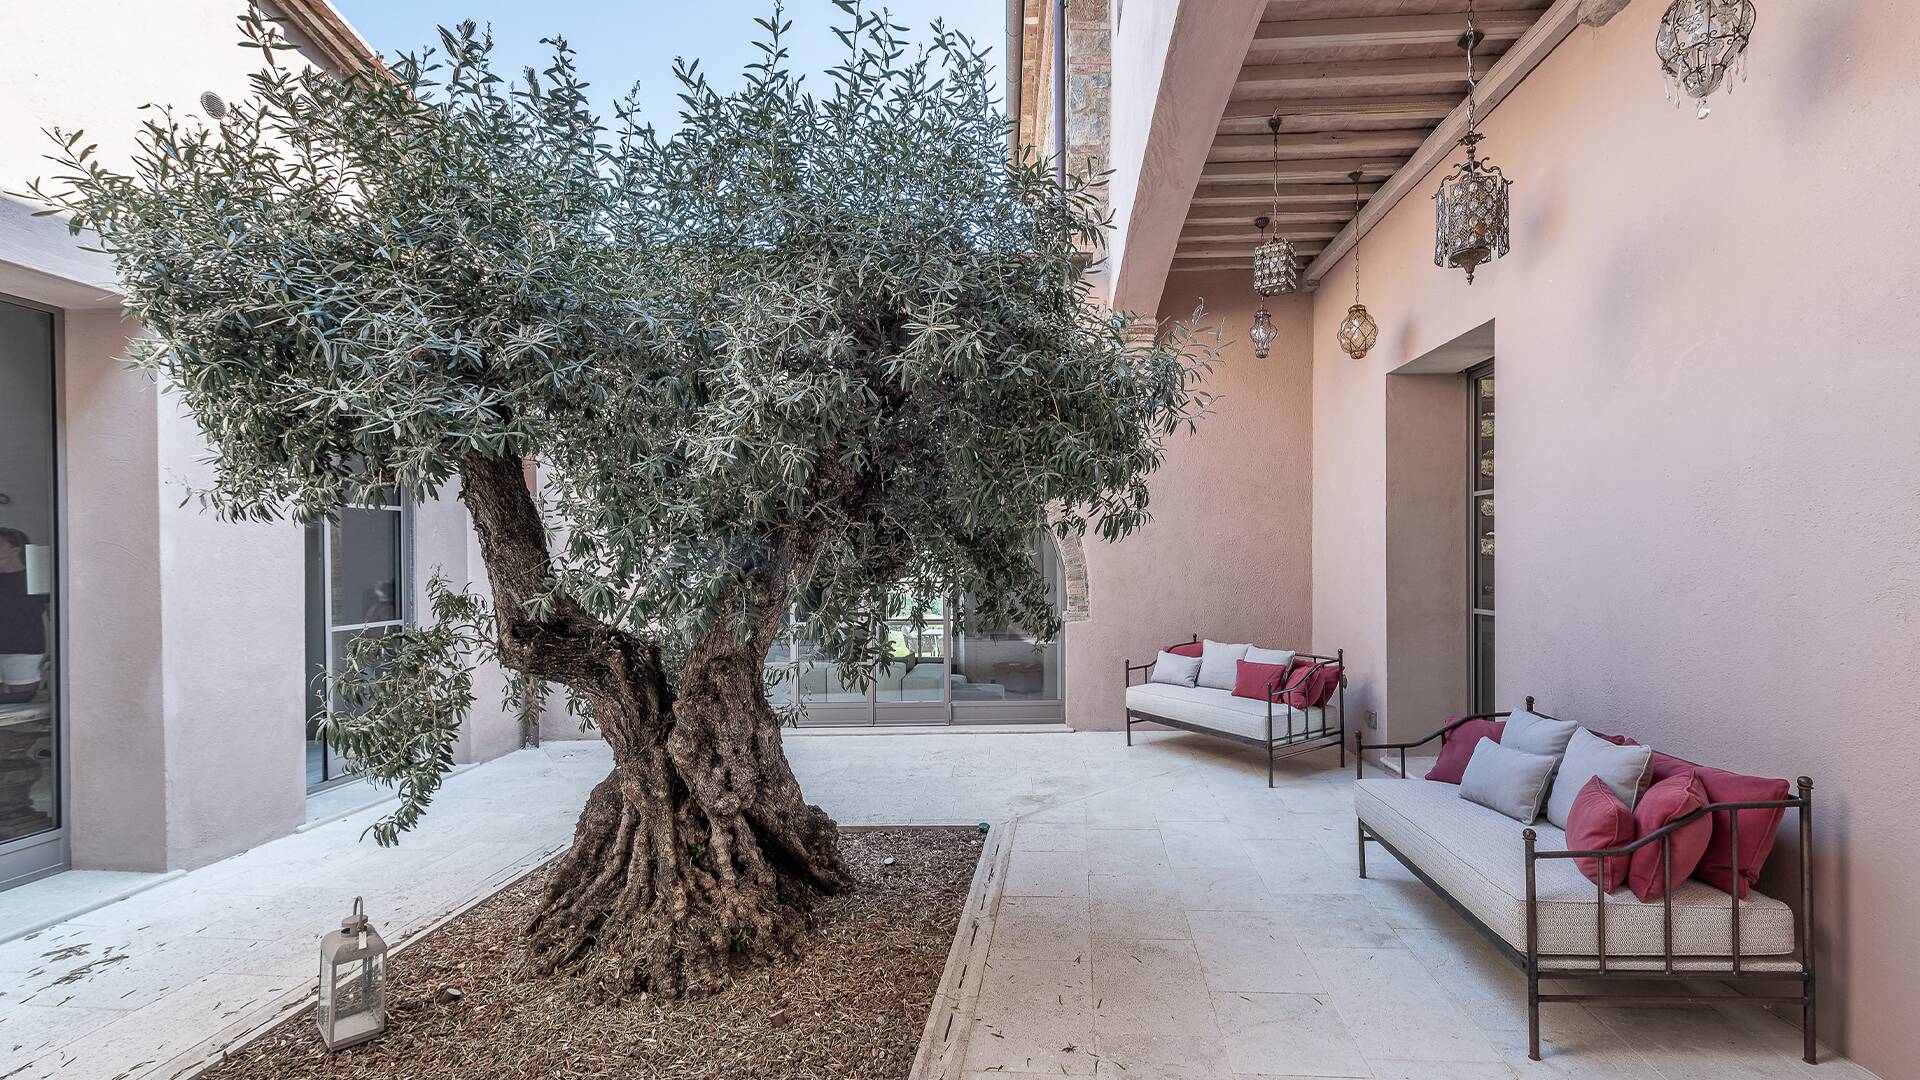 inner court with central olive tree